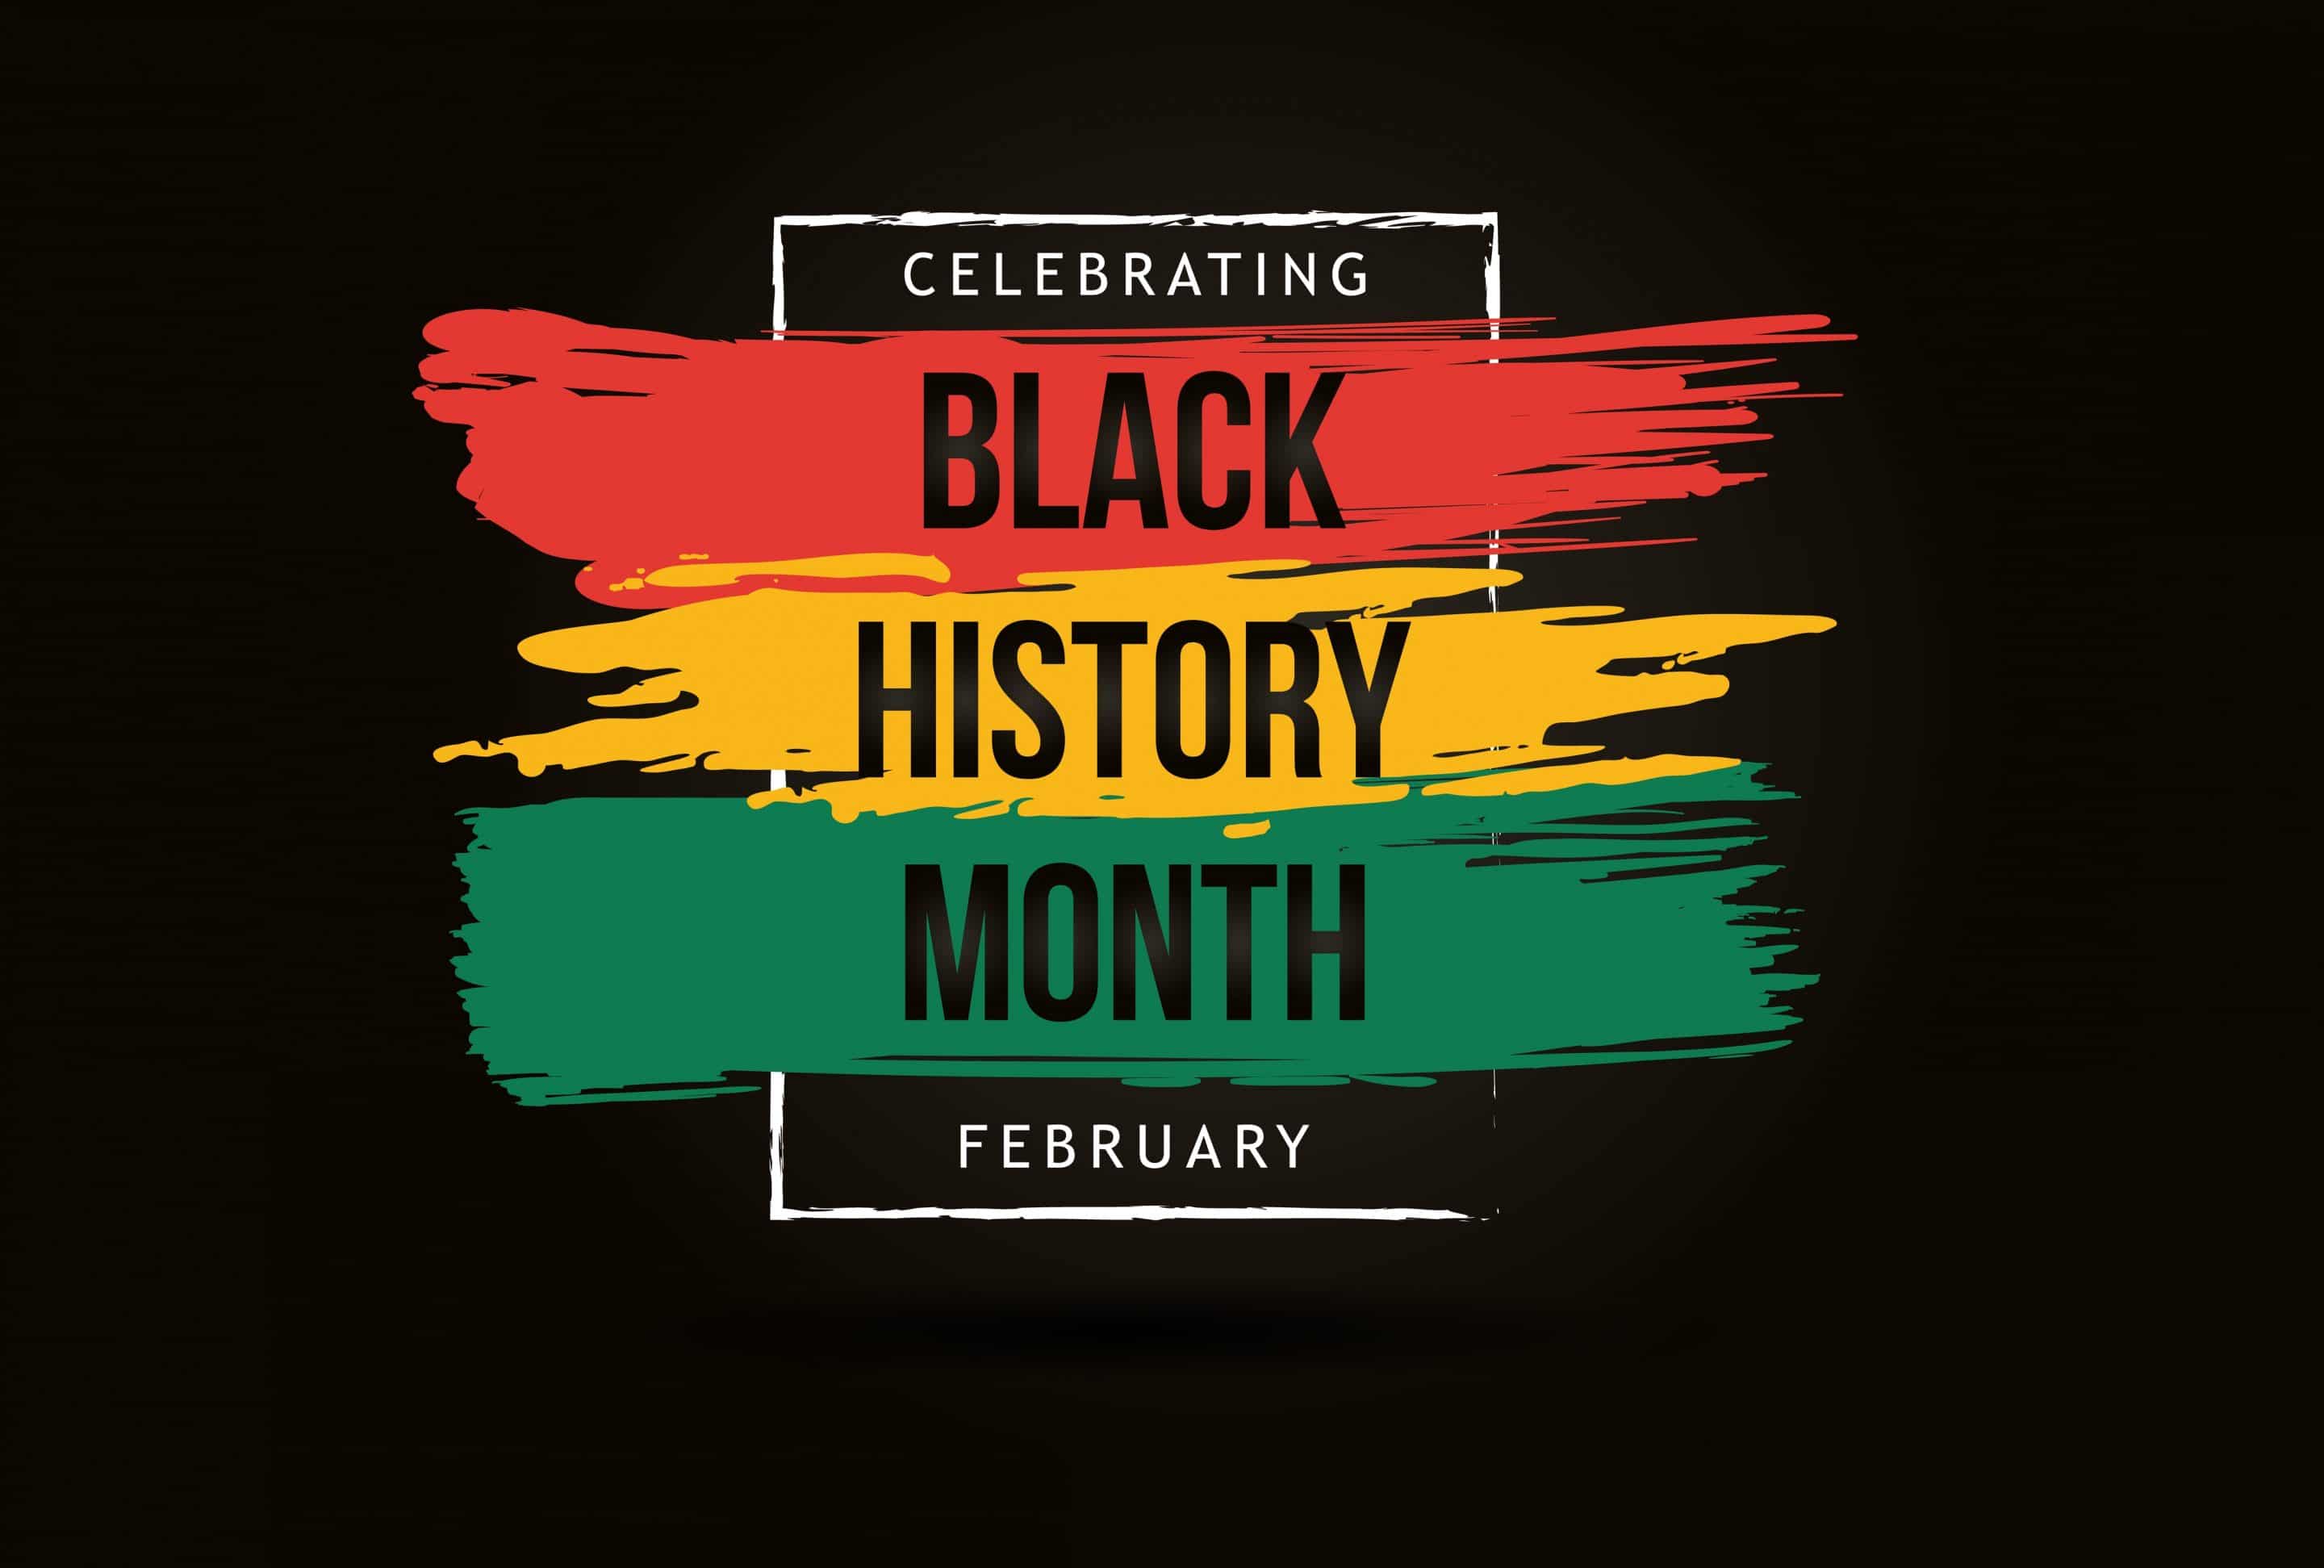 Black History Month: A panel conversation on the Black experience